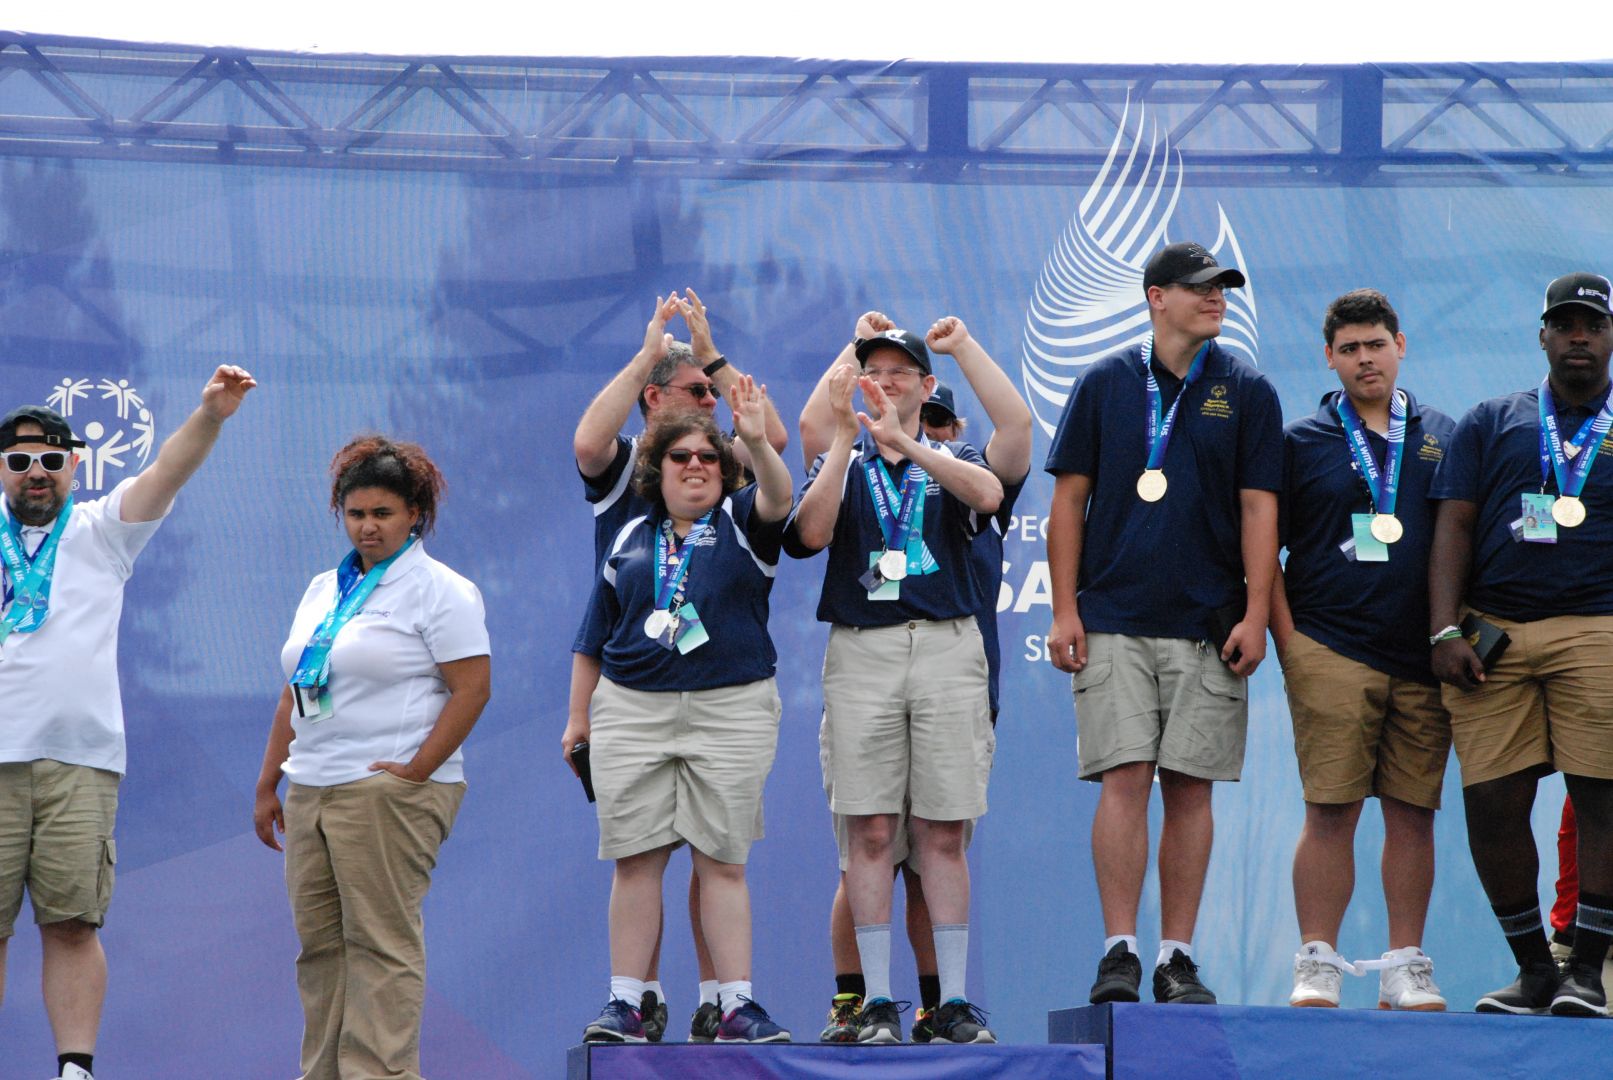 Team Wisconsin's bocce team receives their silver medals